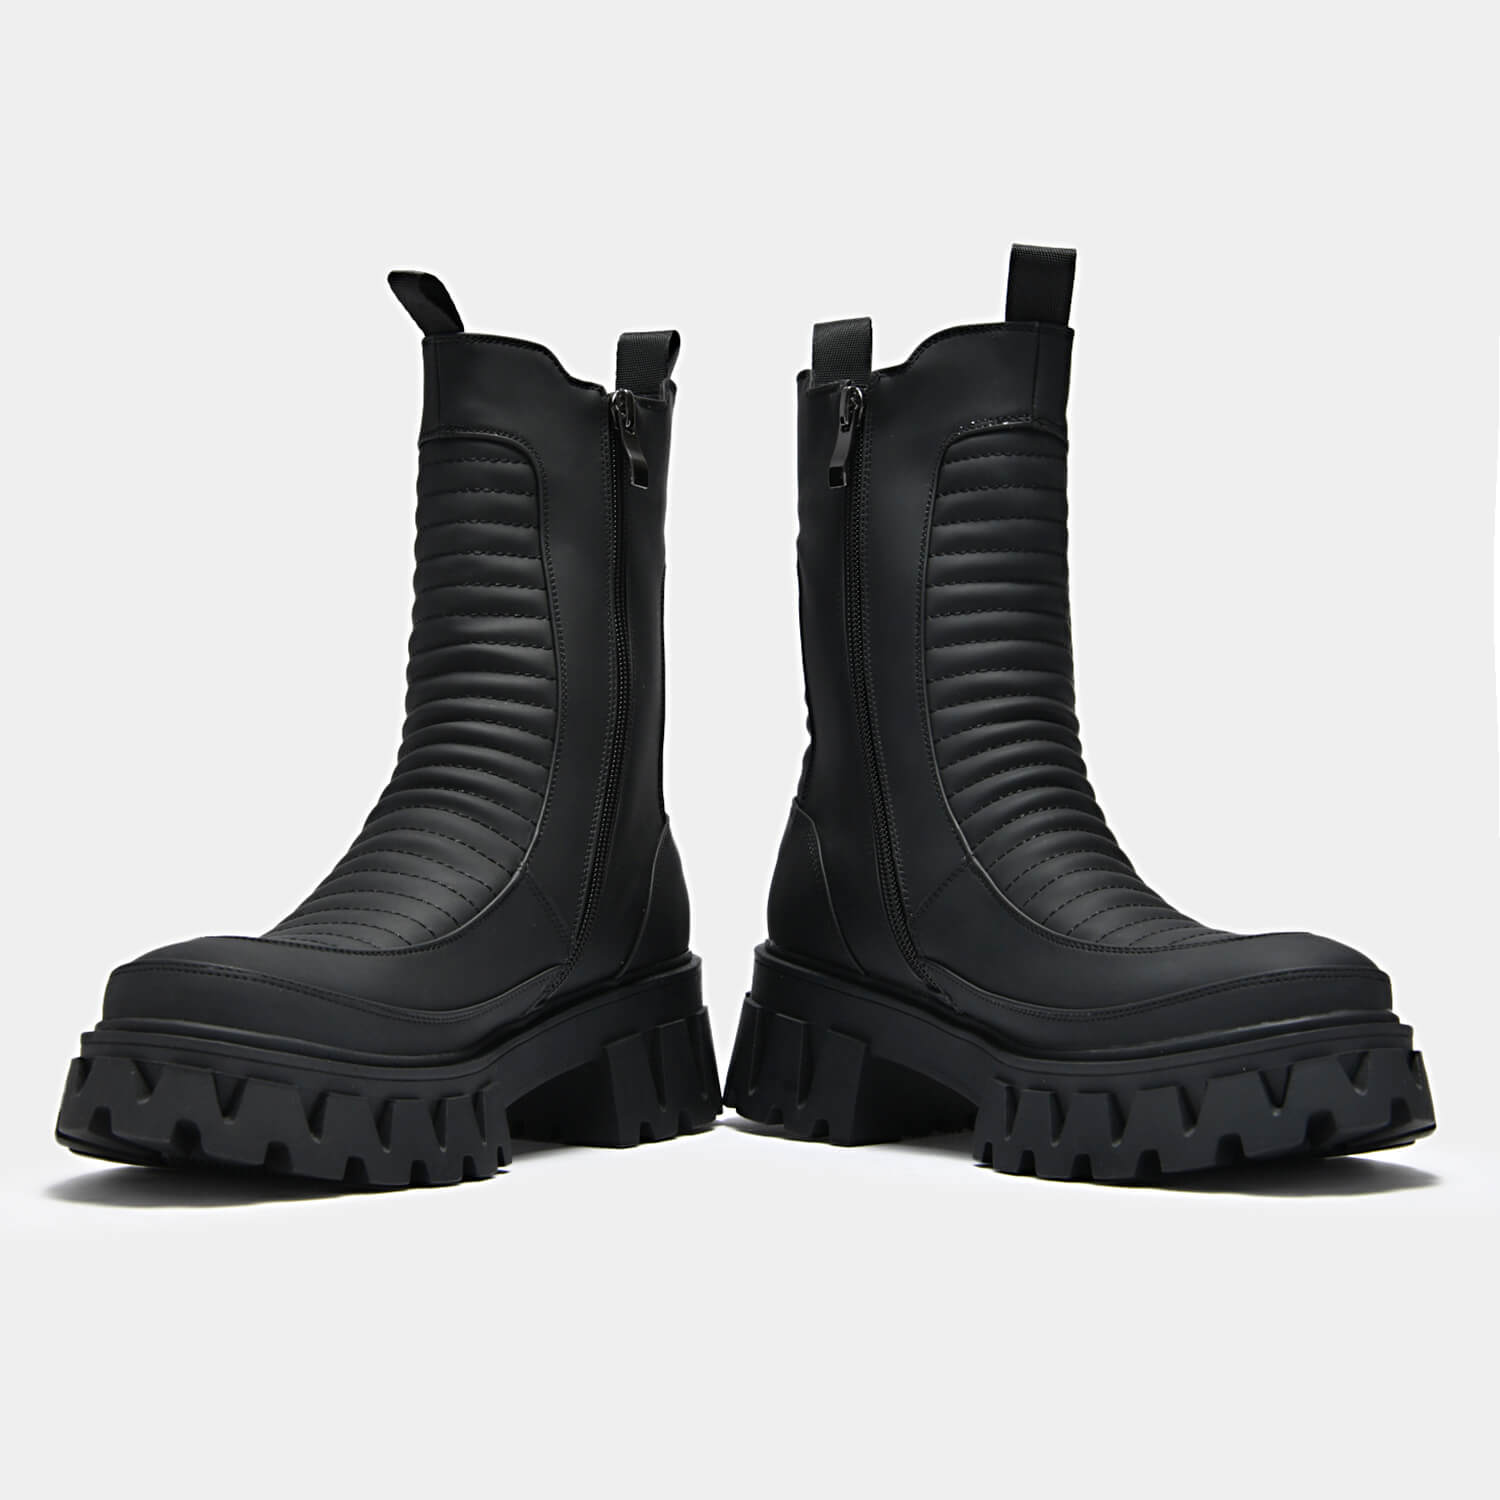 Vader Padded Croft Boots - Ankle Boots - KOI Footwear - Black - Front View